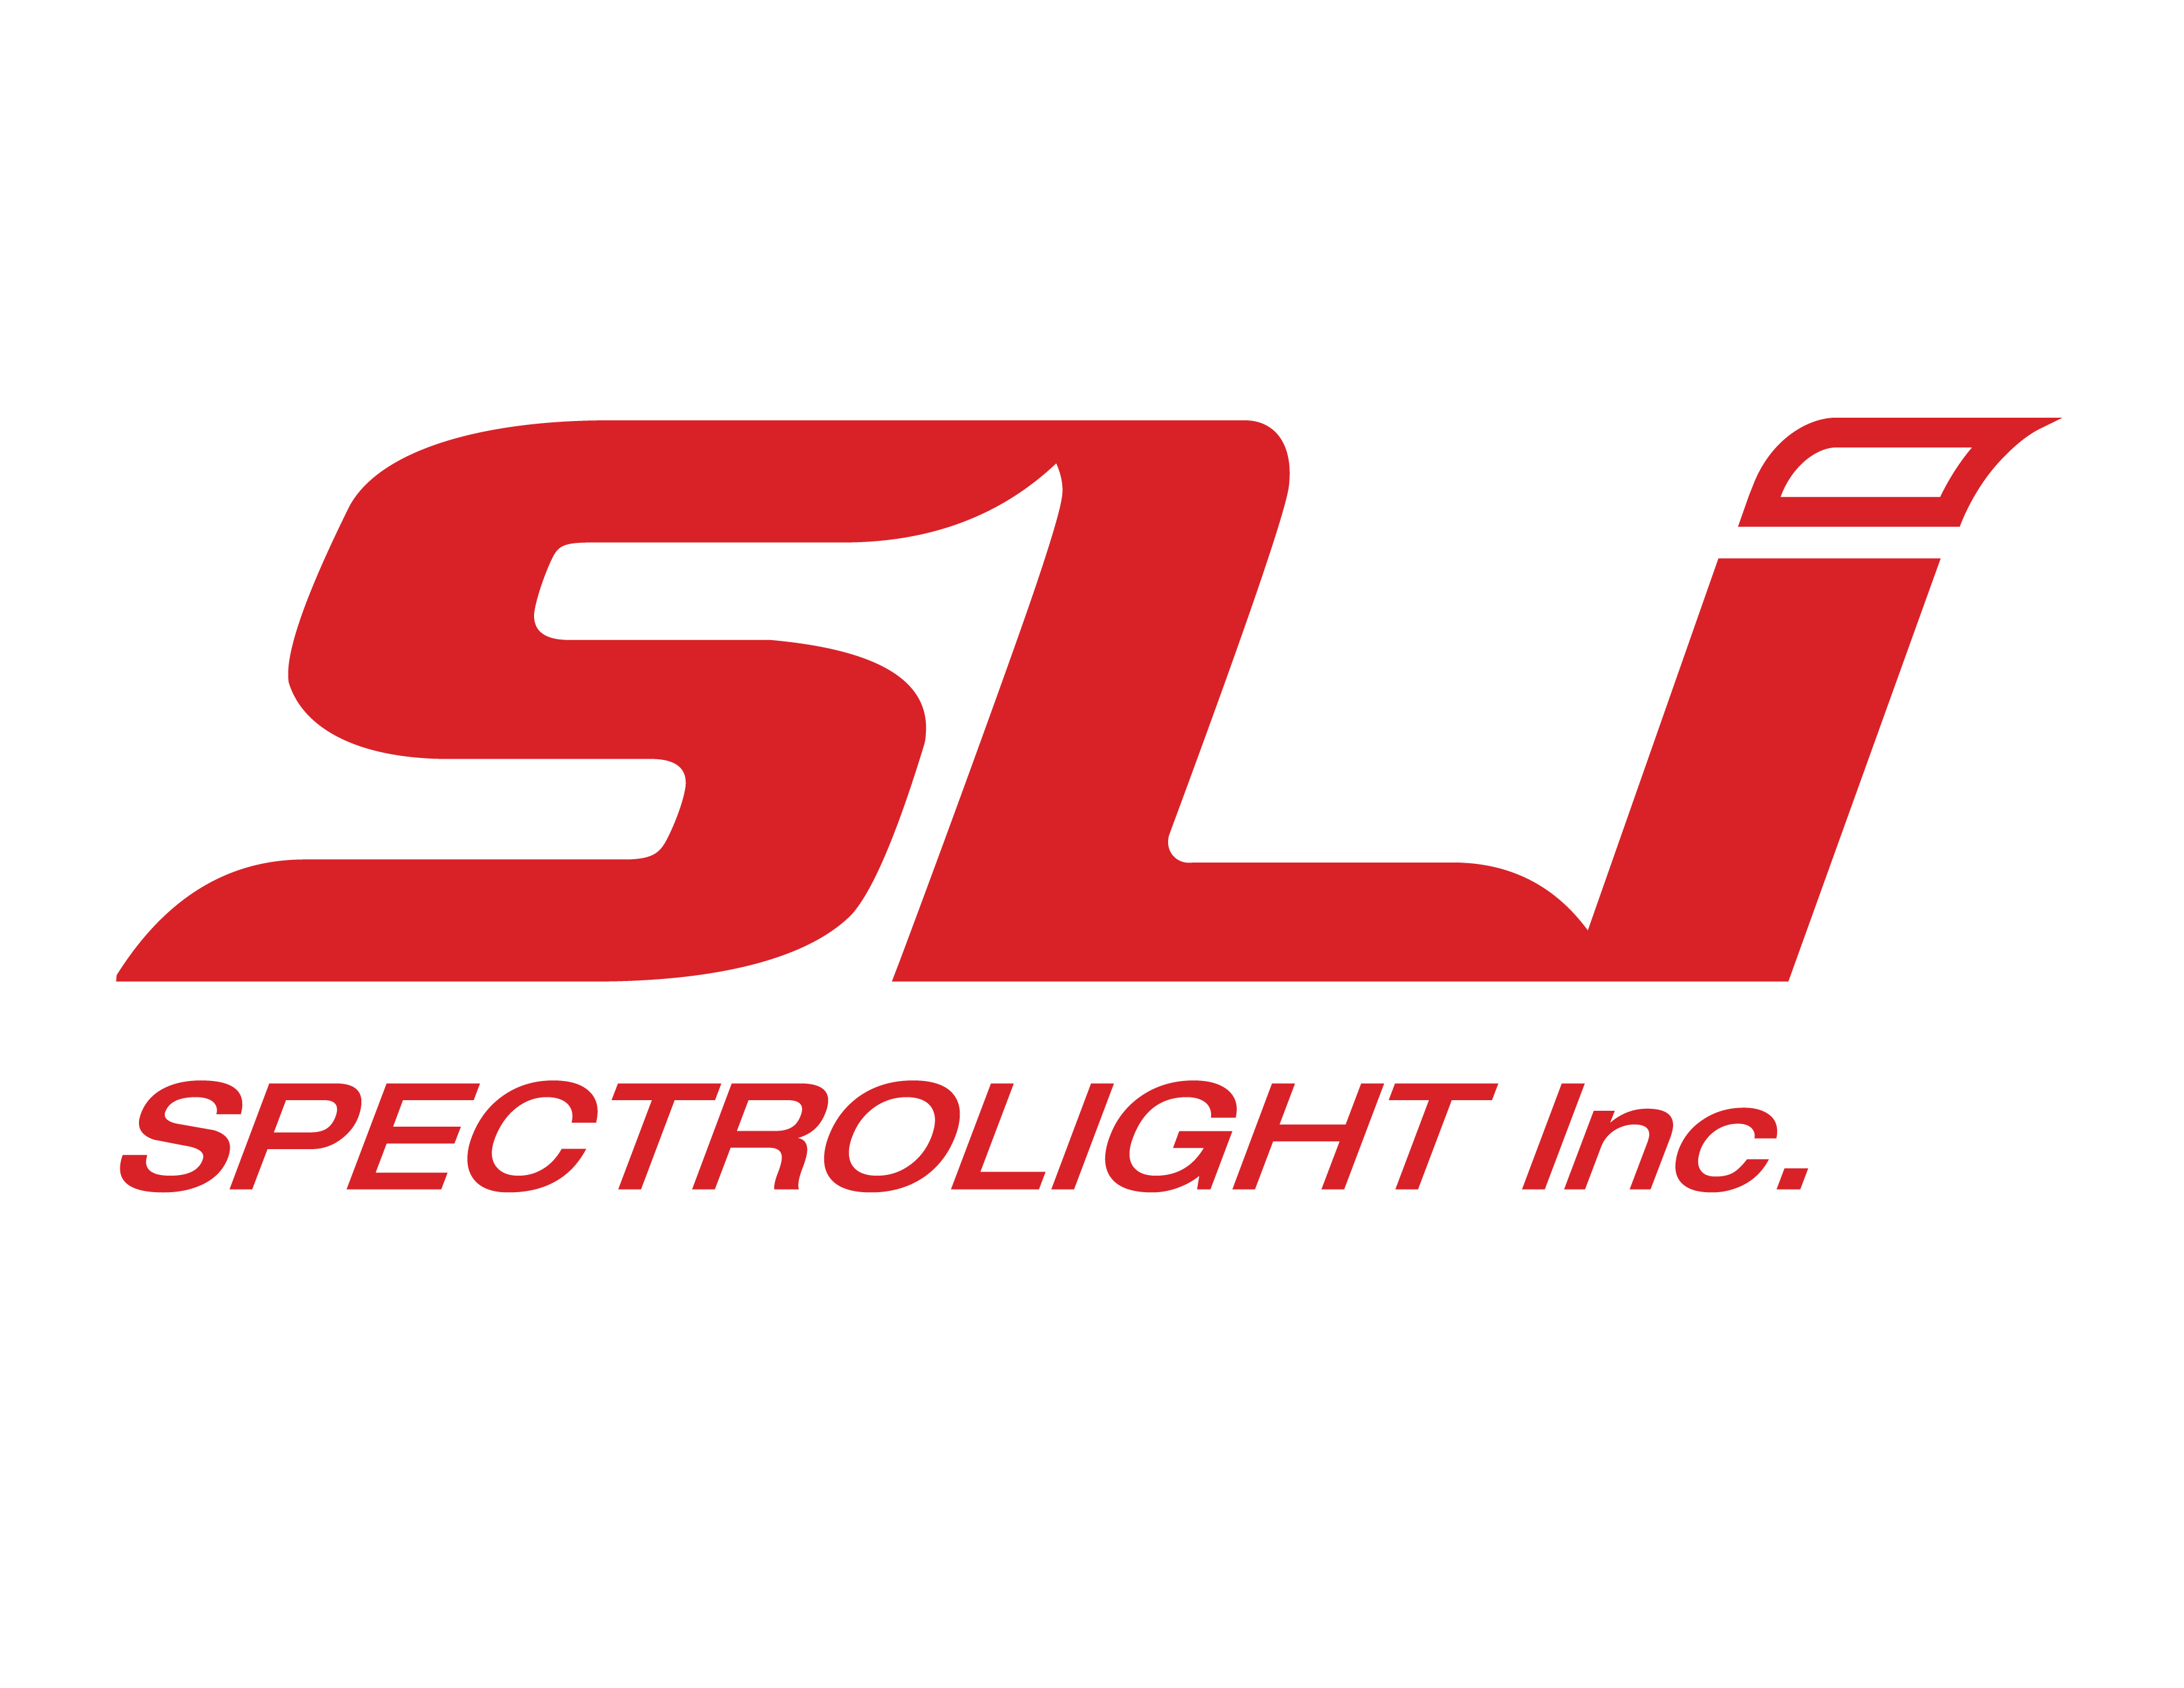 Spectrolight logo red stylized 'SLI' with full name printed below